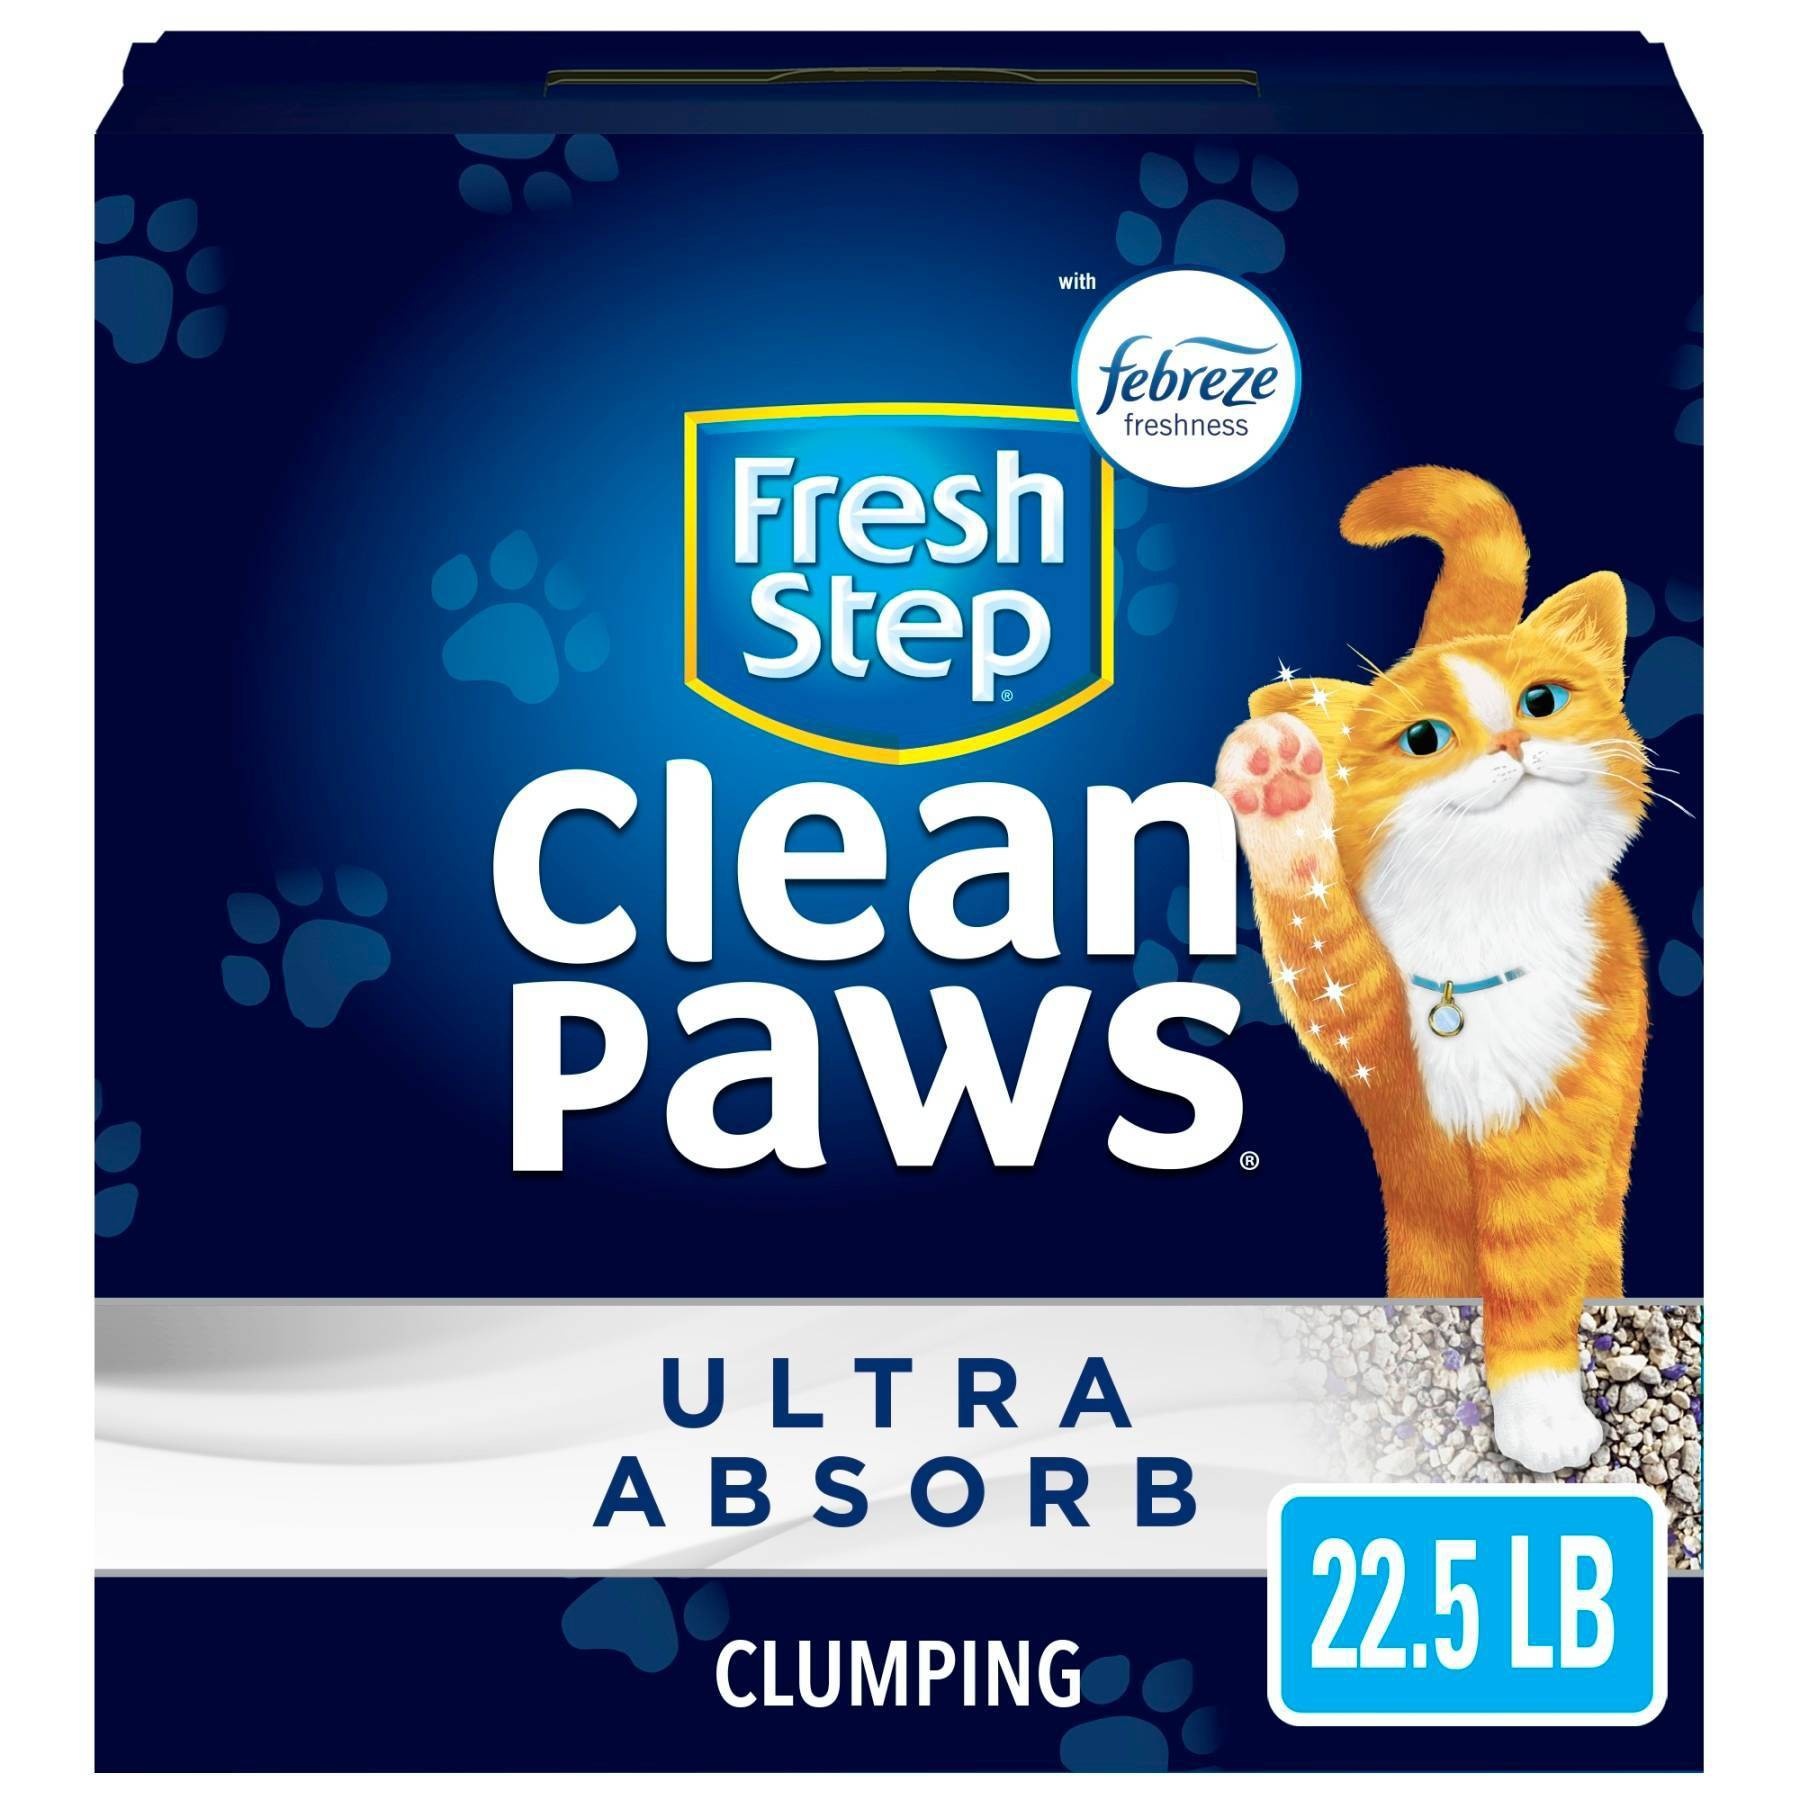 slide 1 of 11, Fresh Step Clean Paws Ultra-Absorb - 22.5lbs, 22.5 lb